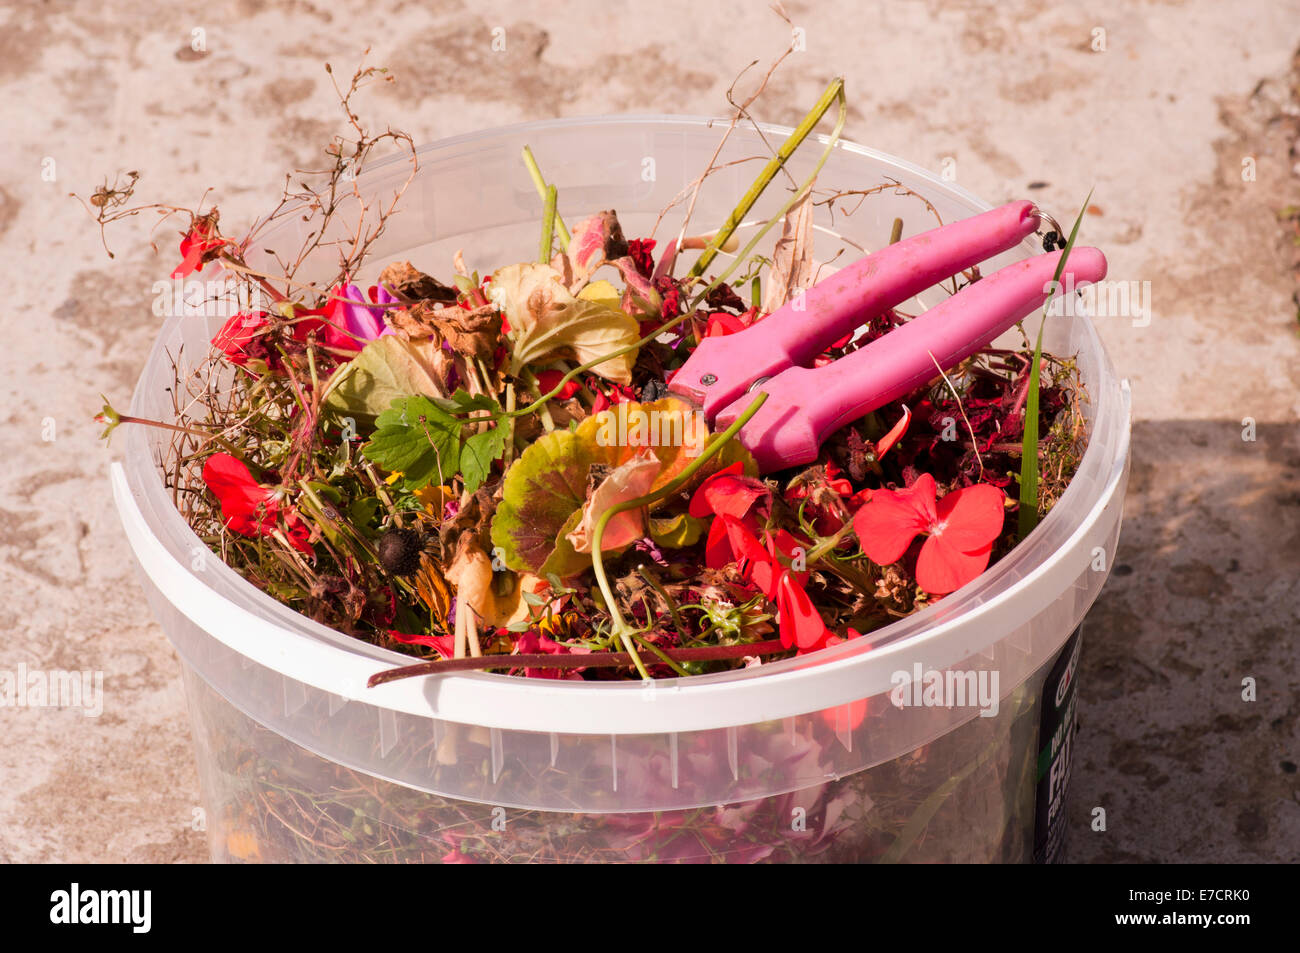 Dead Heads Of Flowers In a Pot with a Pair of Secateurs Stock Photo